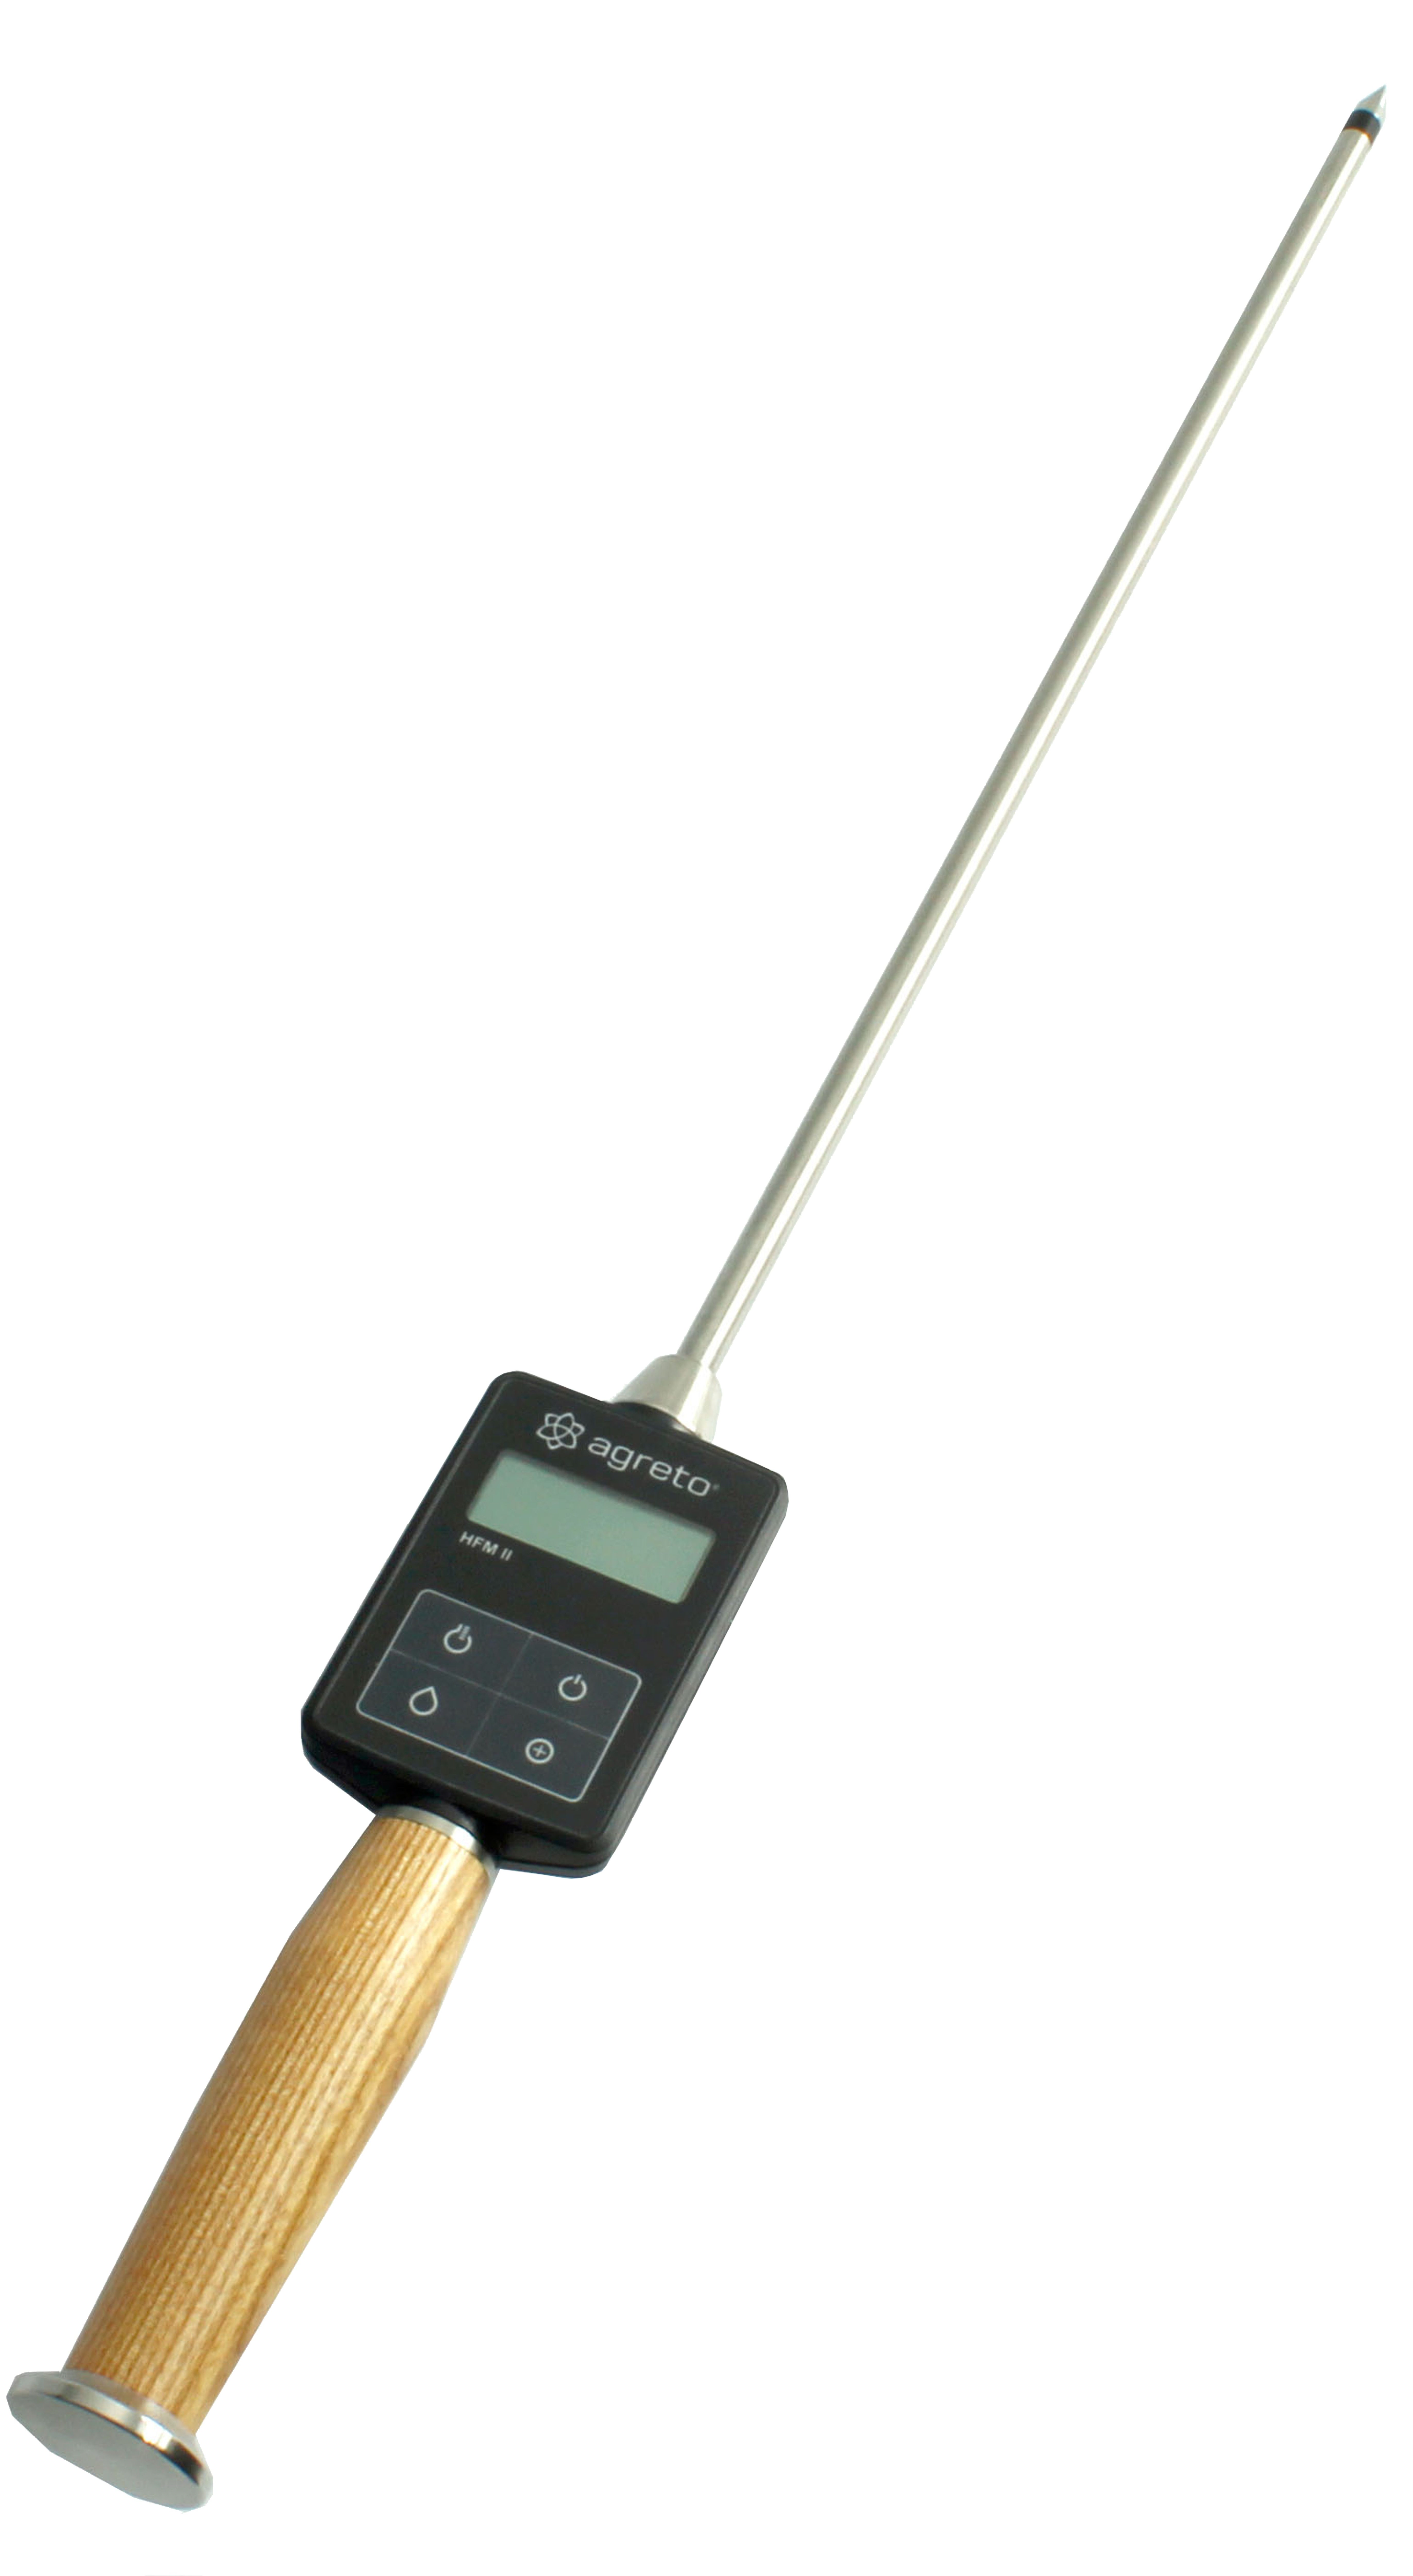 Hay moisture tester / meter  Professional devices from Agreto